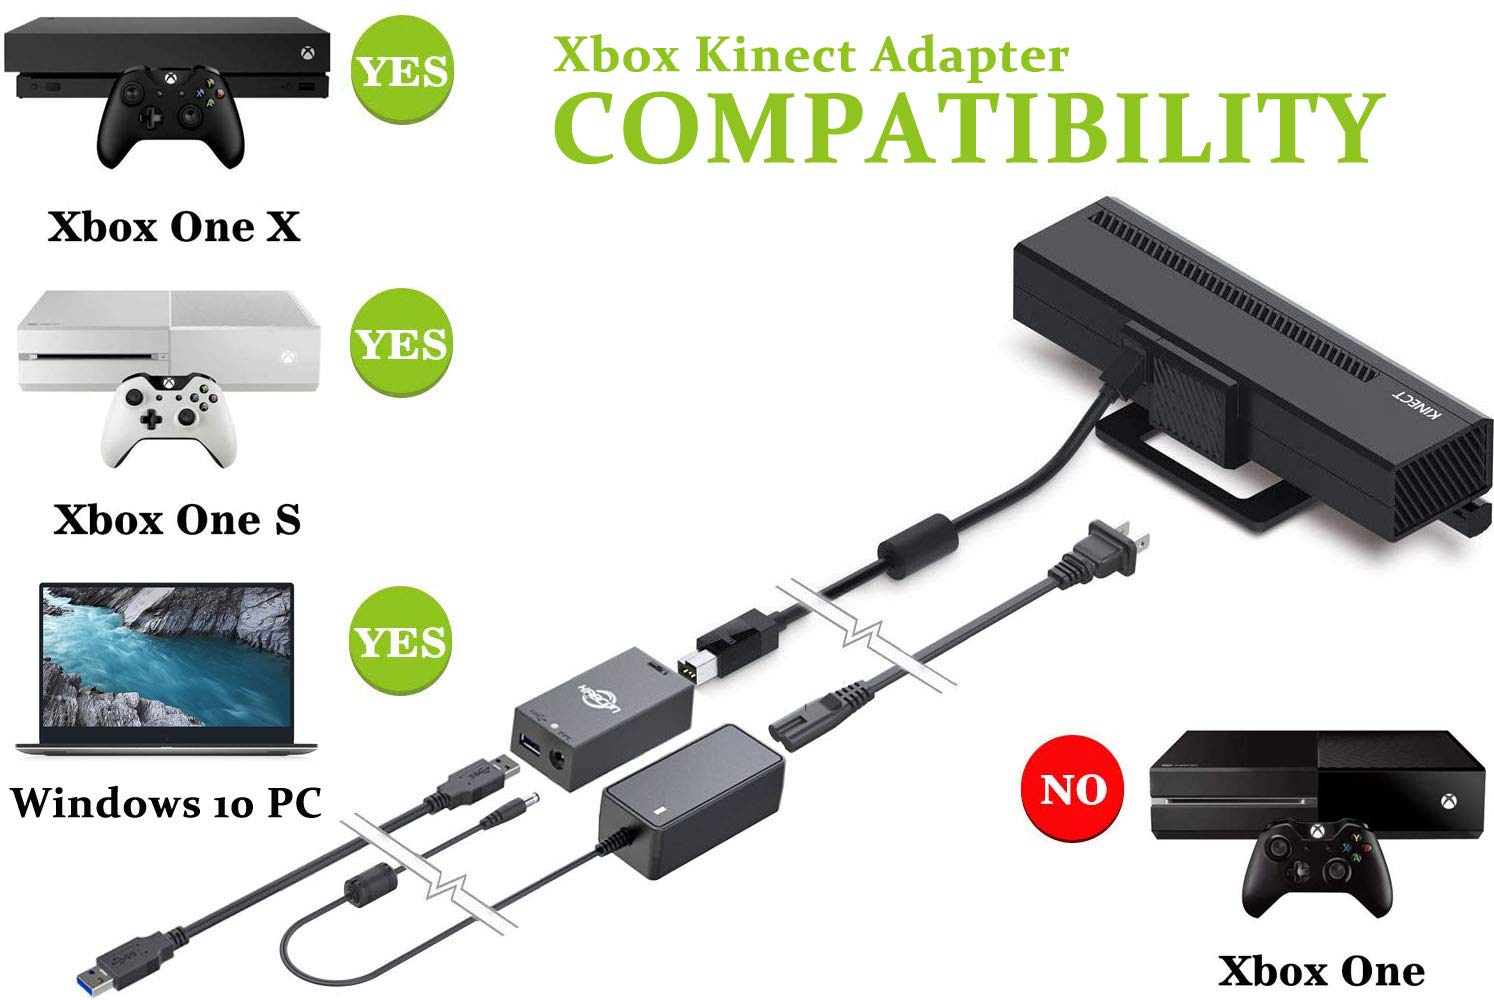 [ship from the US]Kinect Adapter for Xbox One S Xbox One X Windows PC [UL  Listed]